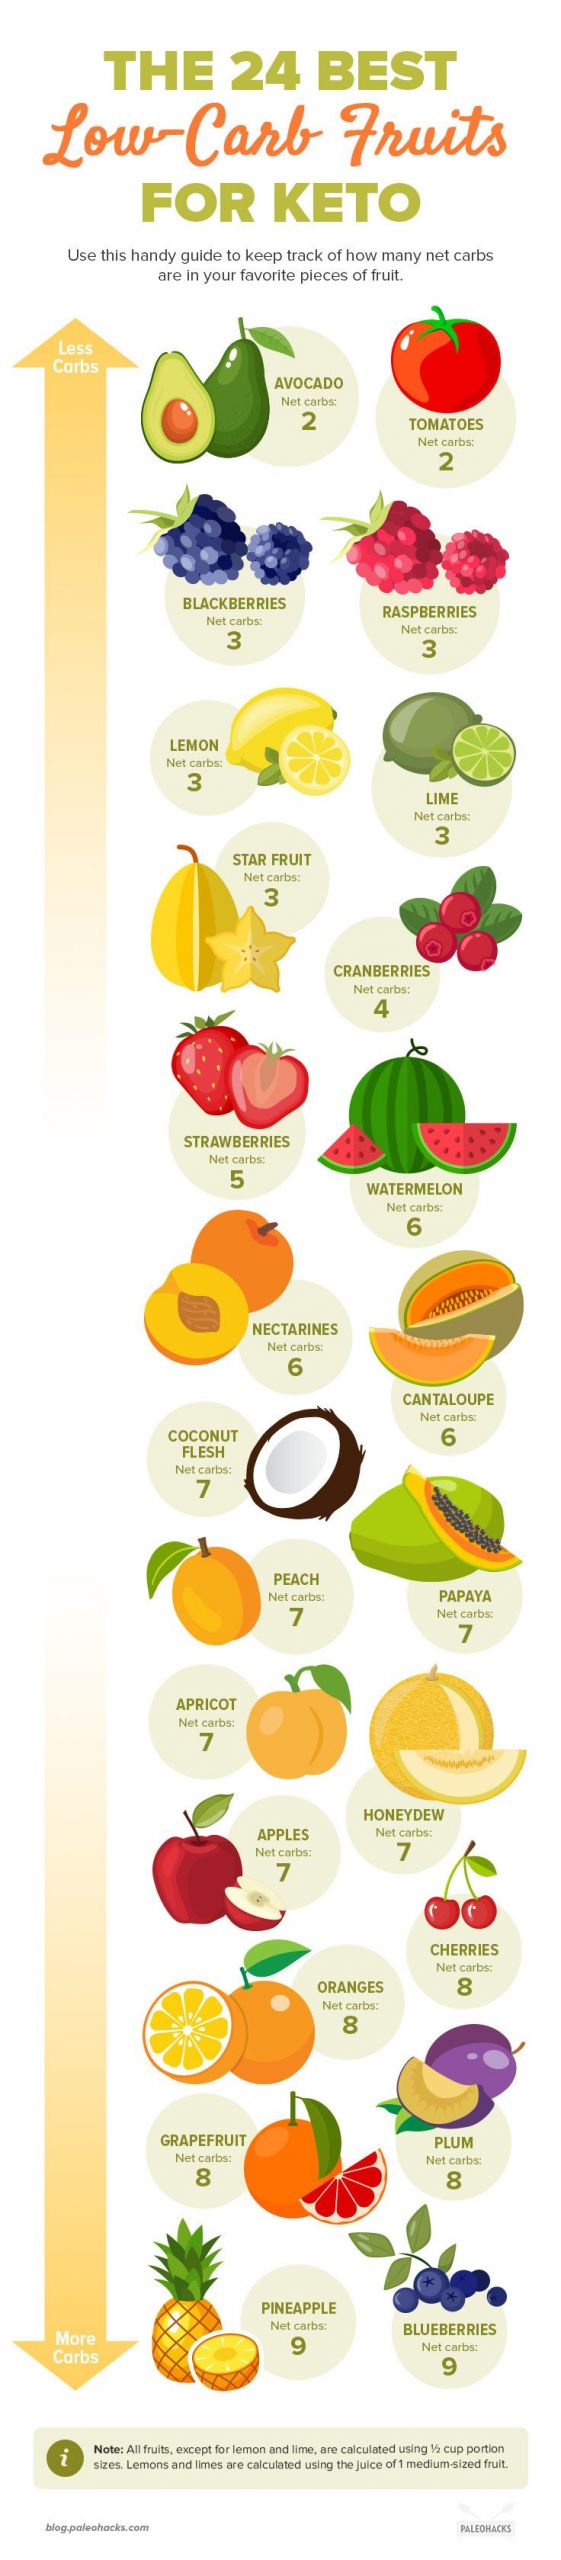 Fruits Keto Diet
 The 24 Best Low Carb Fruits for Keto